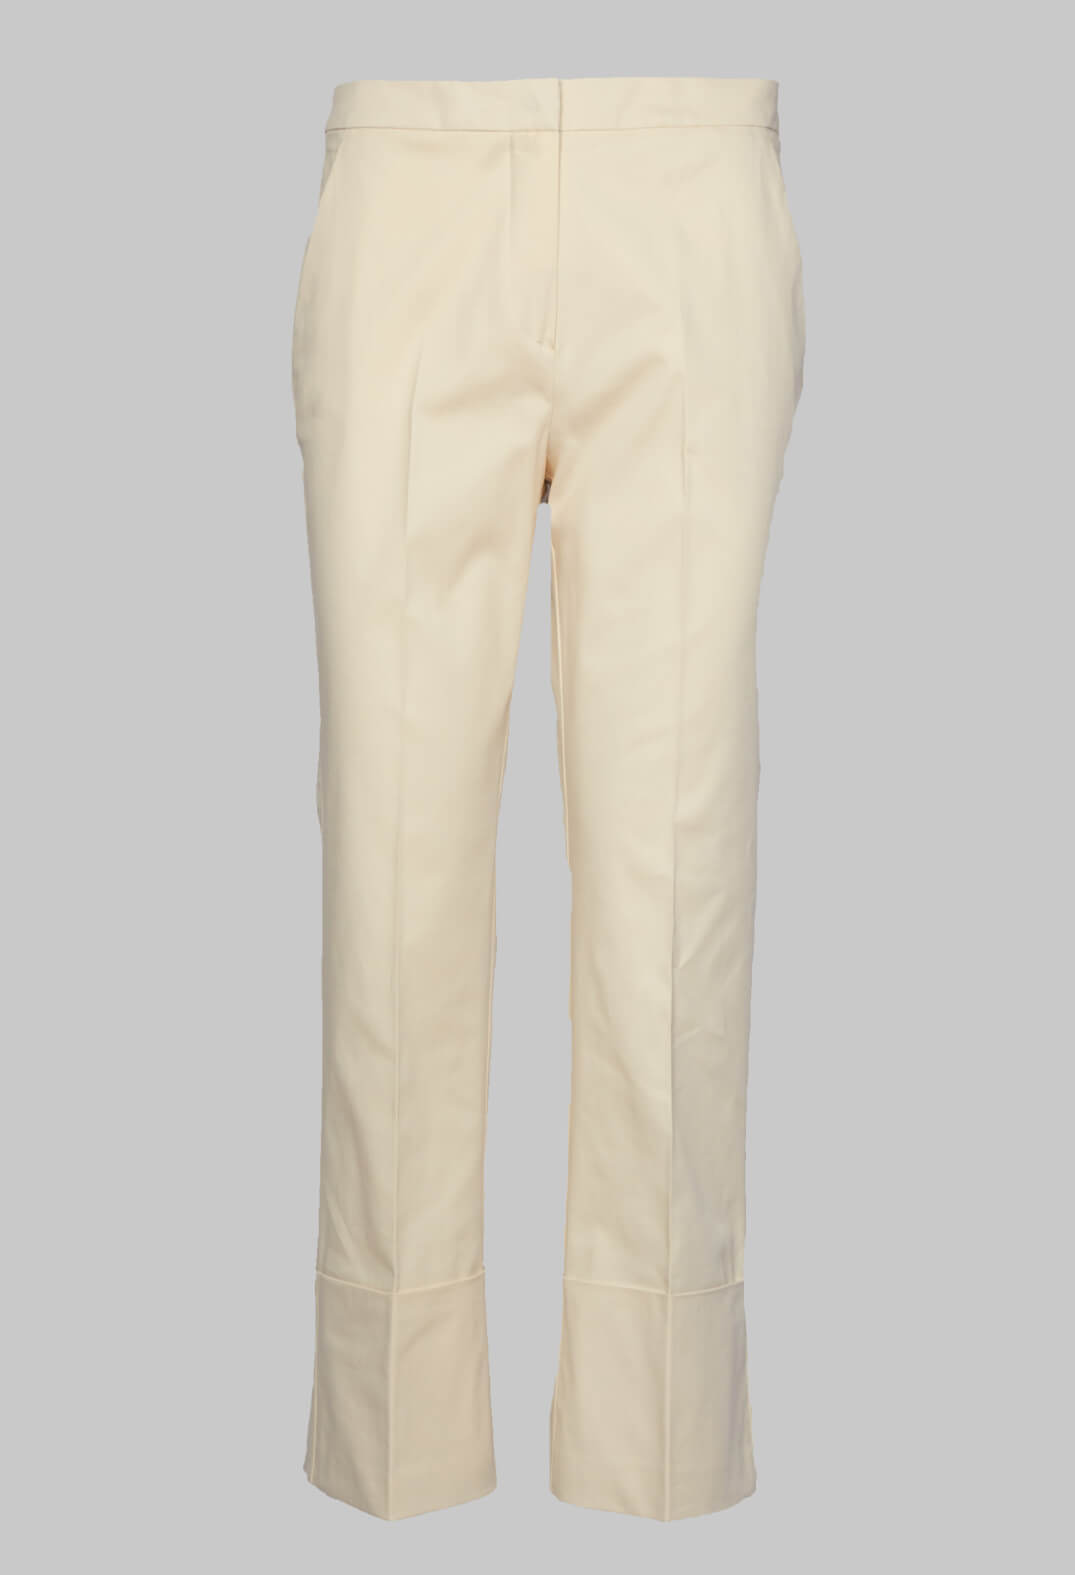 Beatrice B cream trousers with large turn up